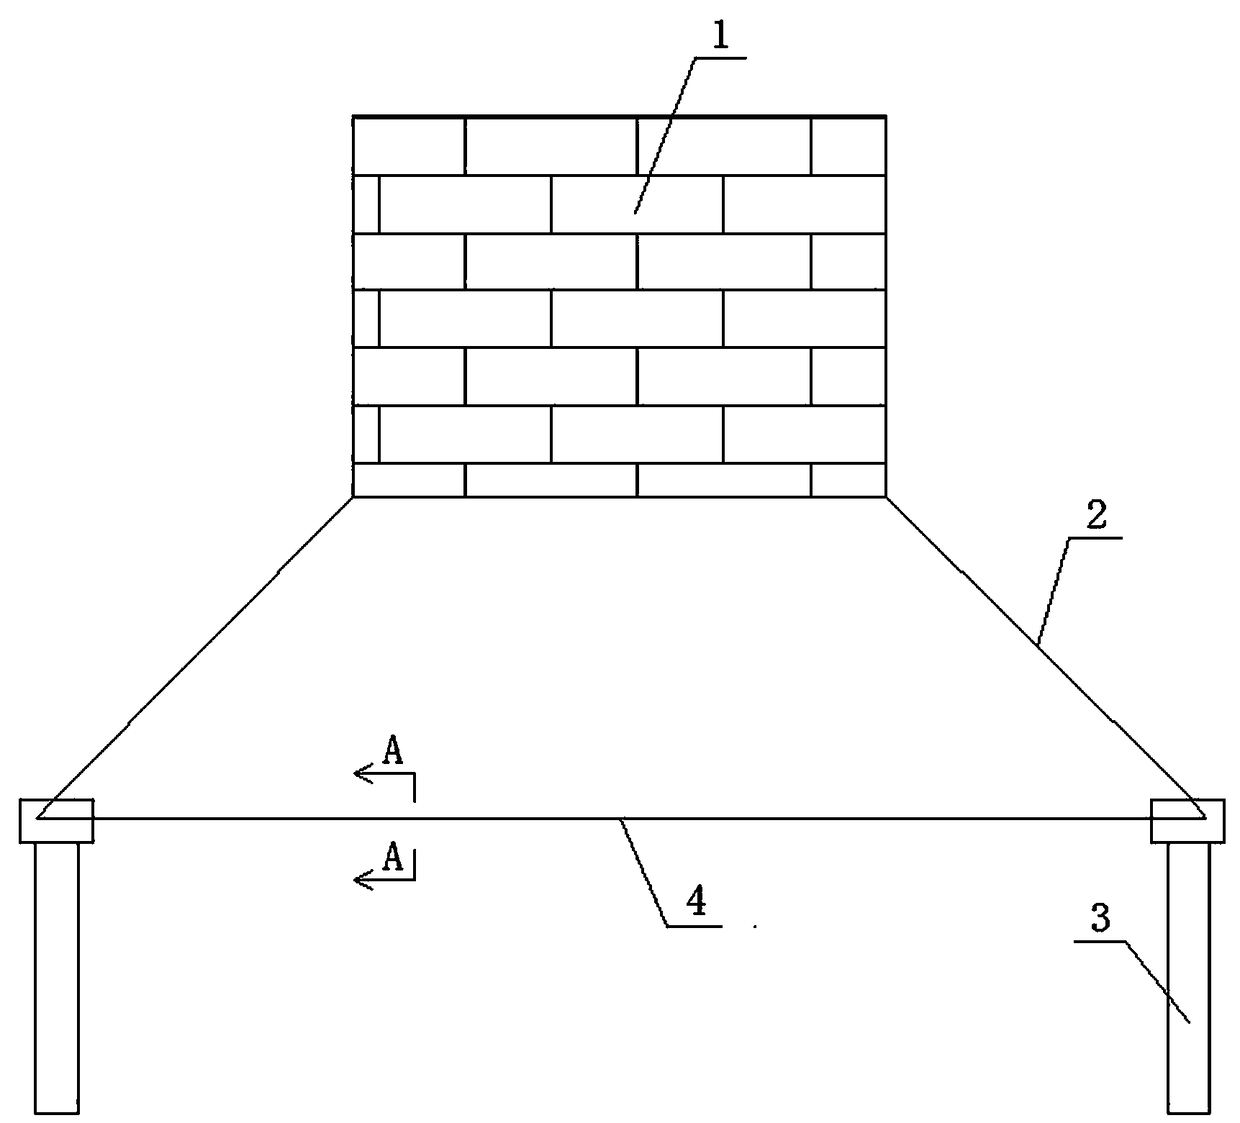 Prestressed concrete filled steel tube tensile tie beam for preventing displacement of cushion caps and construction method